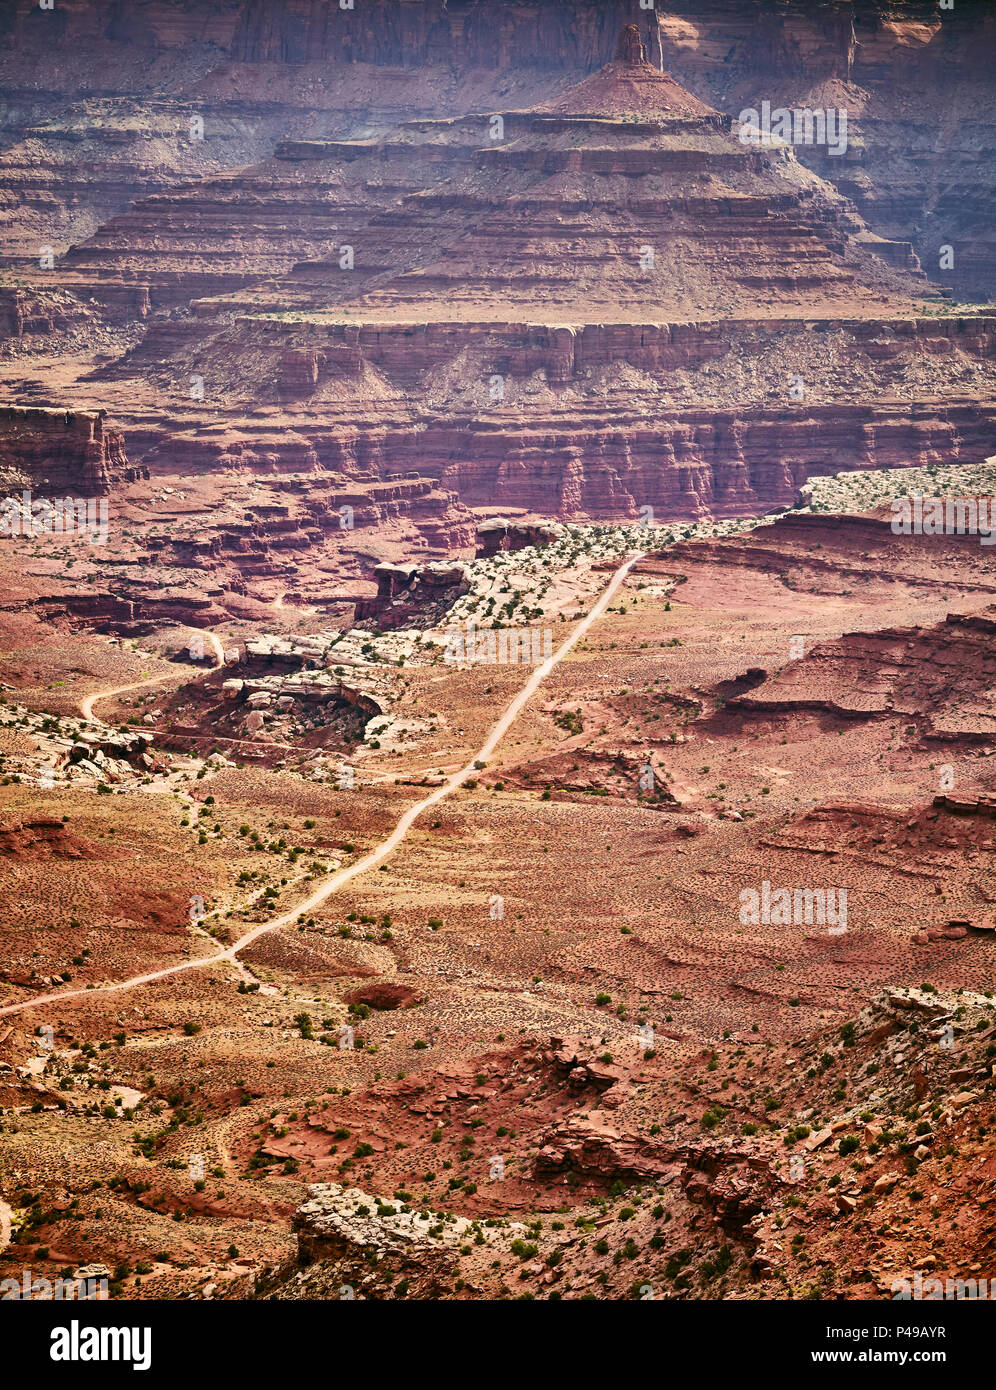 Aerial view of a dirt road in Canyonlands National Park, Island in the Sky region, Utah, USA. Stock Photo